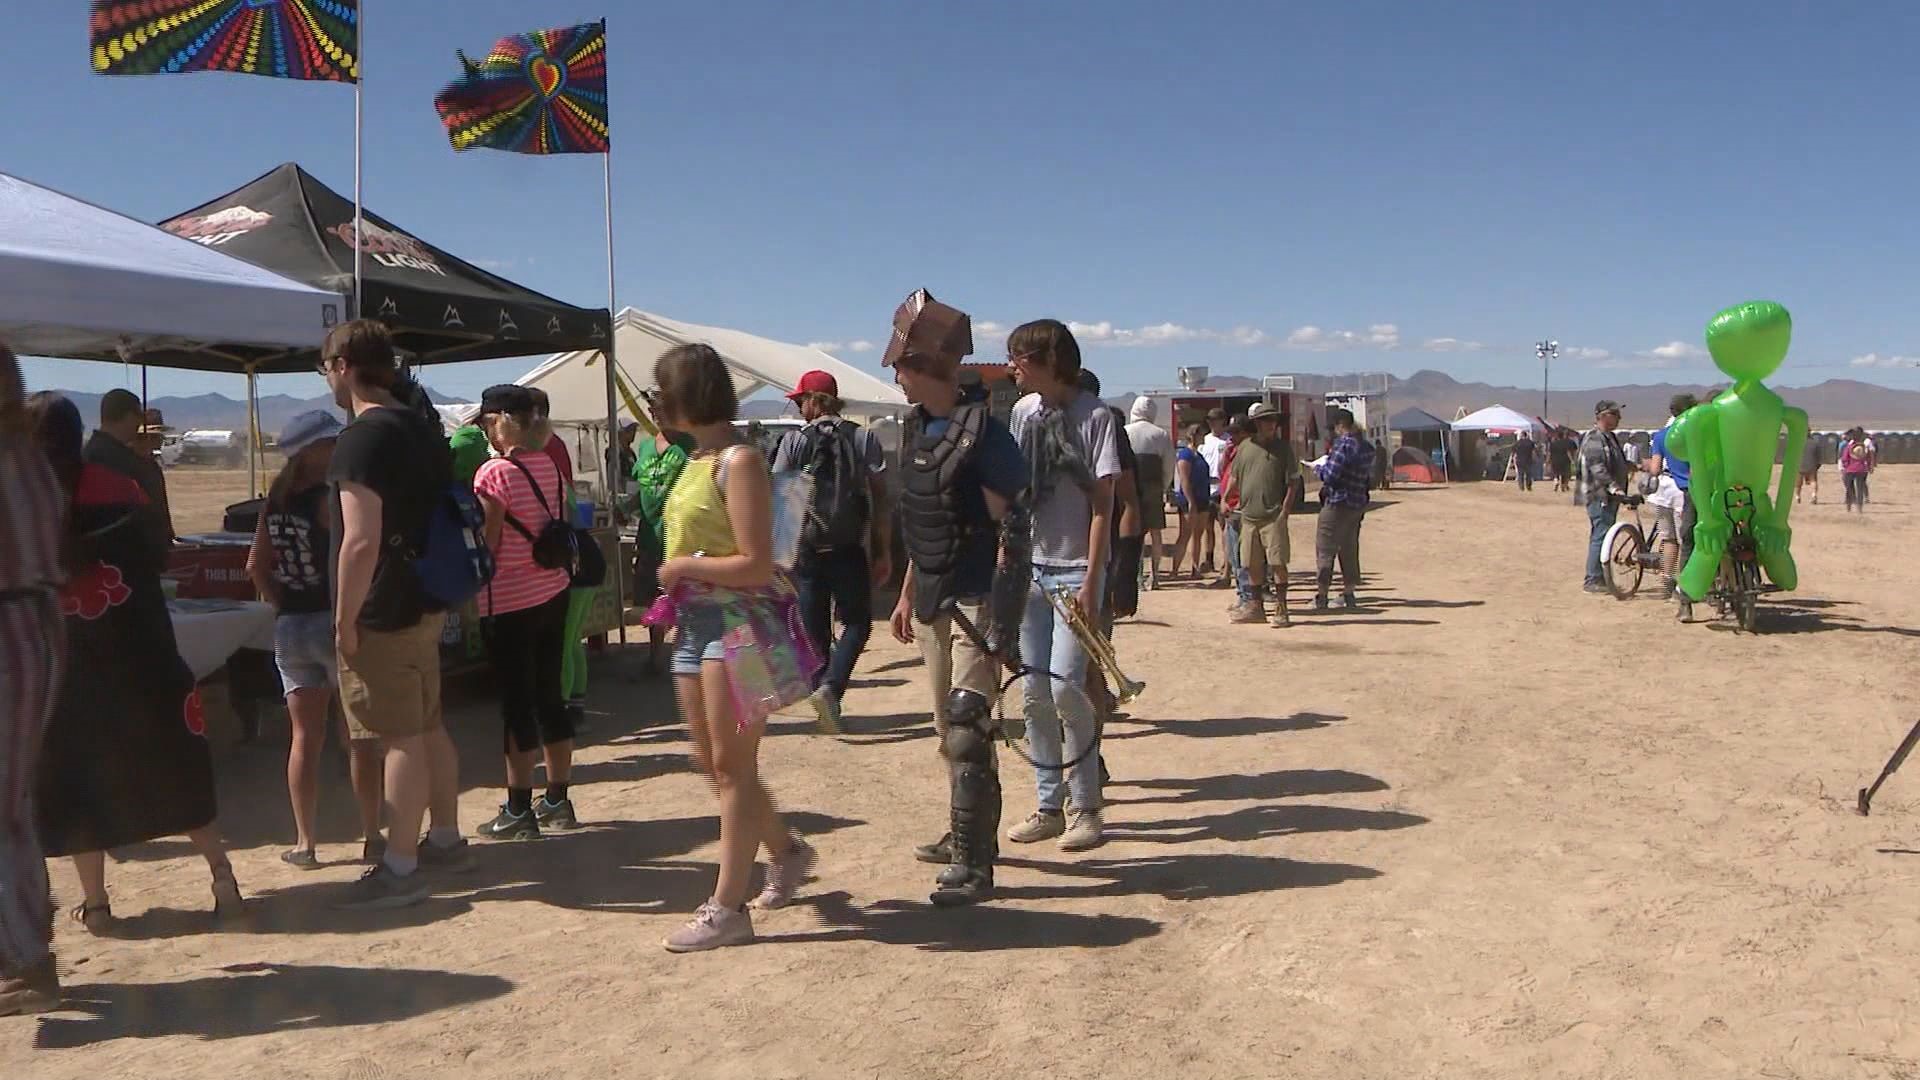 It started as a joke on Facebook. But thousands literally showed up at Area 51 for a party